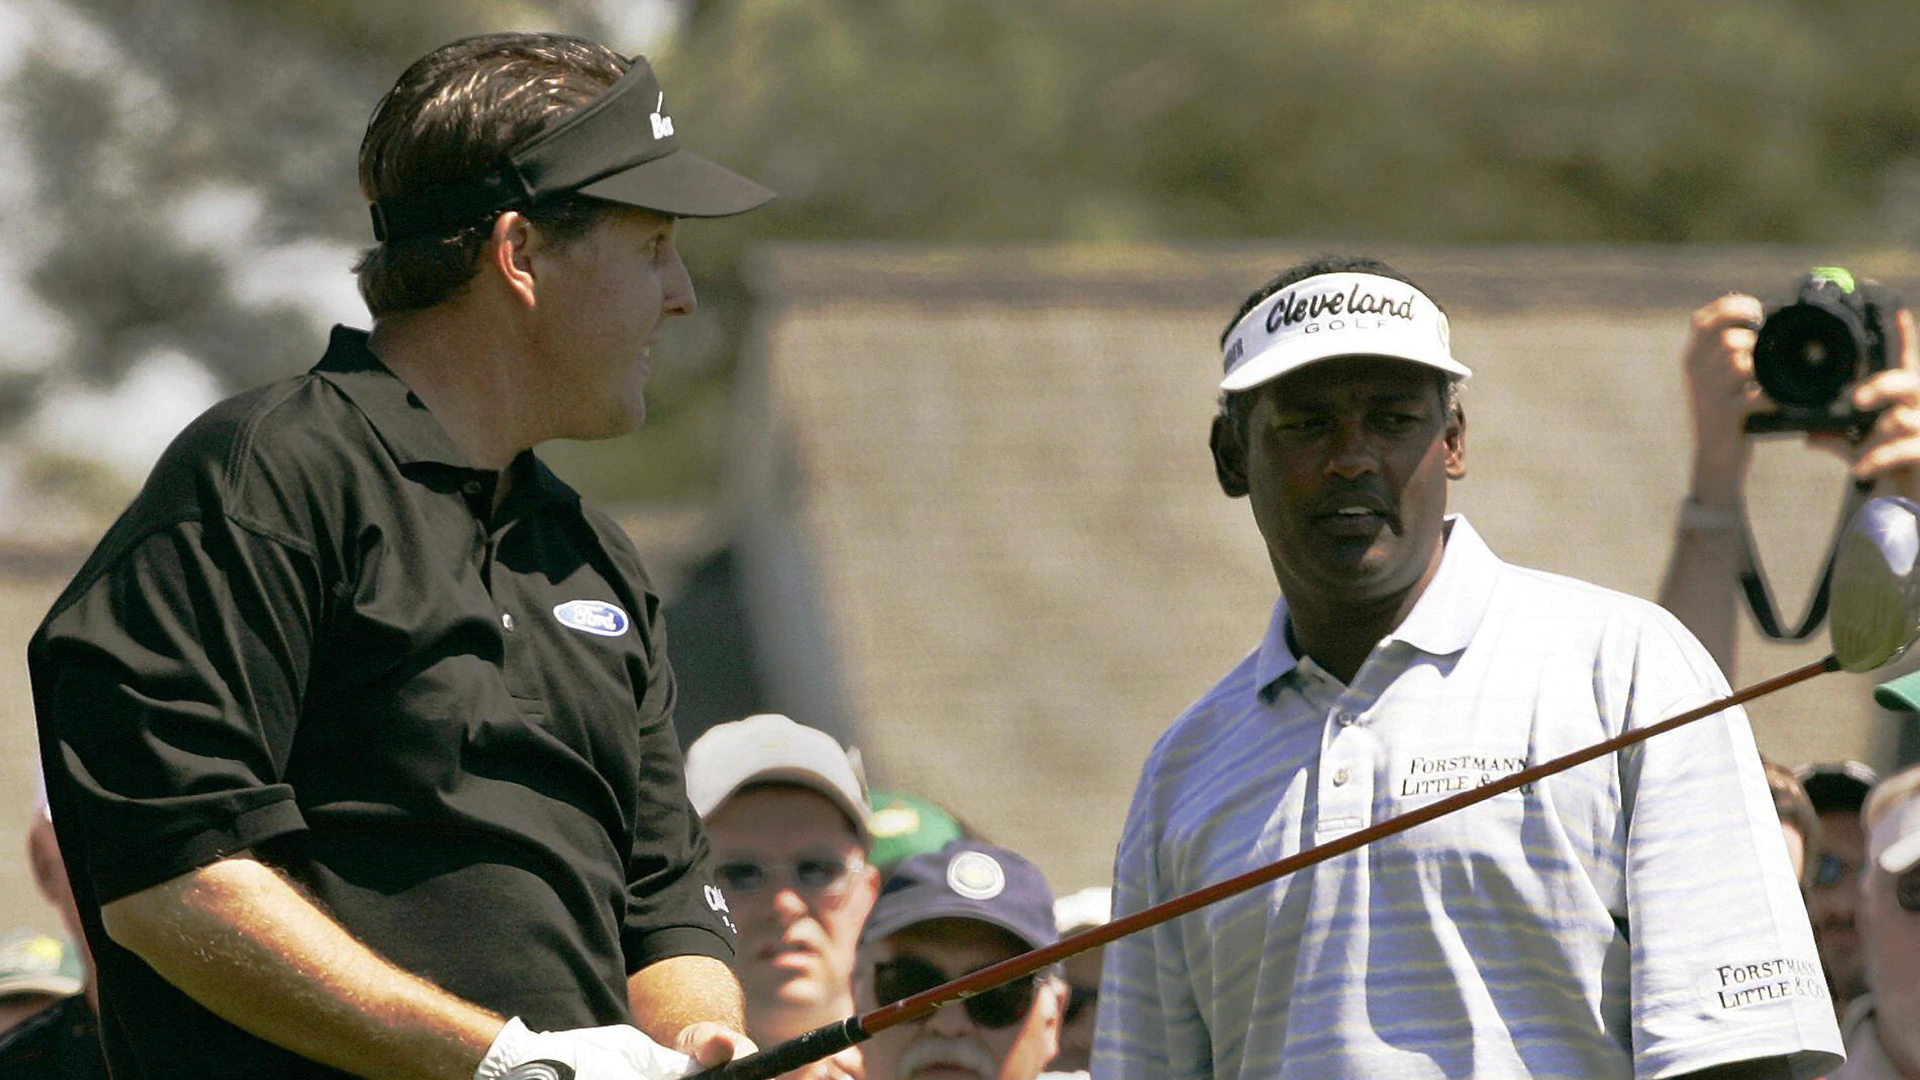 Phil Mickelson springs to Vijay Singh’s defense over Korn Ferry criticism